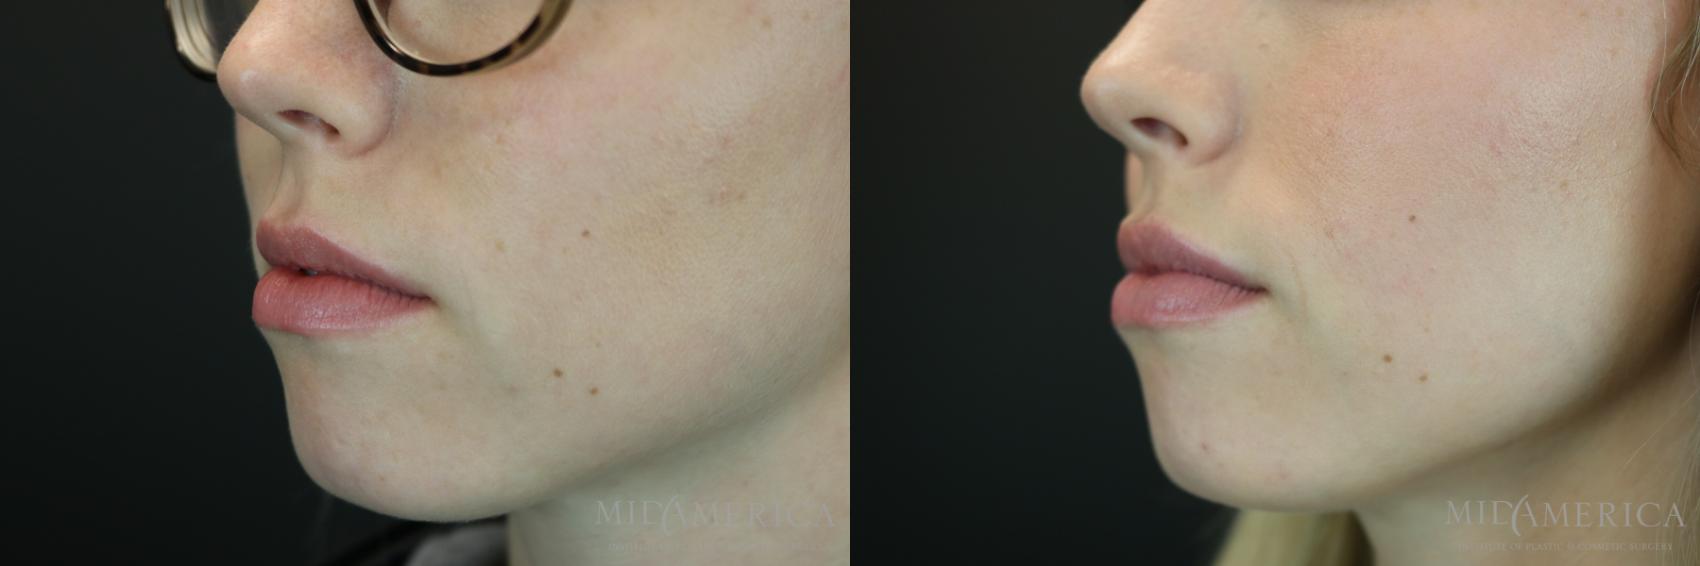 Dermal Fillers Before And After Pictures Case Glen Carbon IL MidAmerica Plastic Surgery